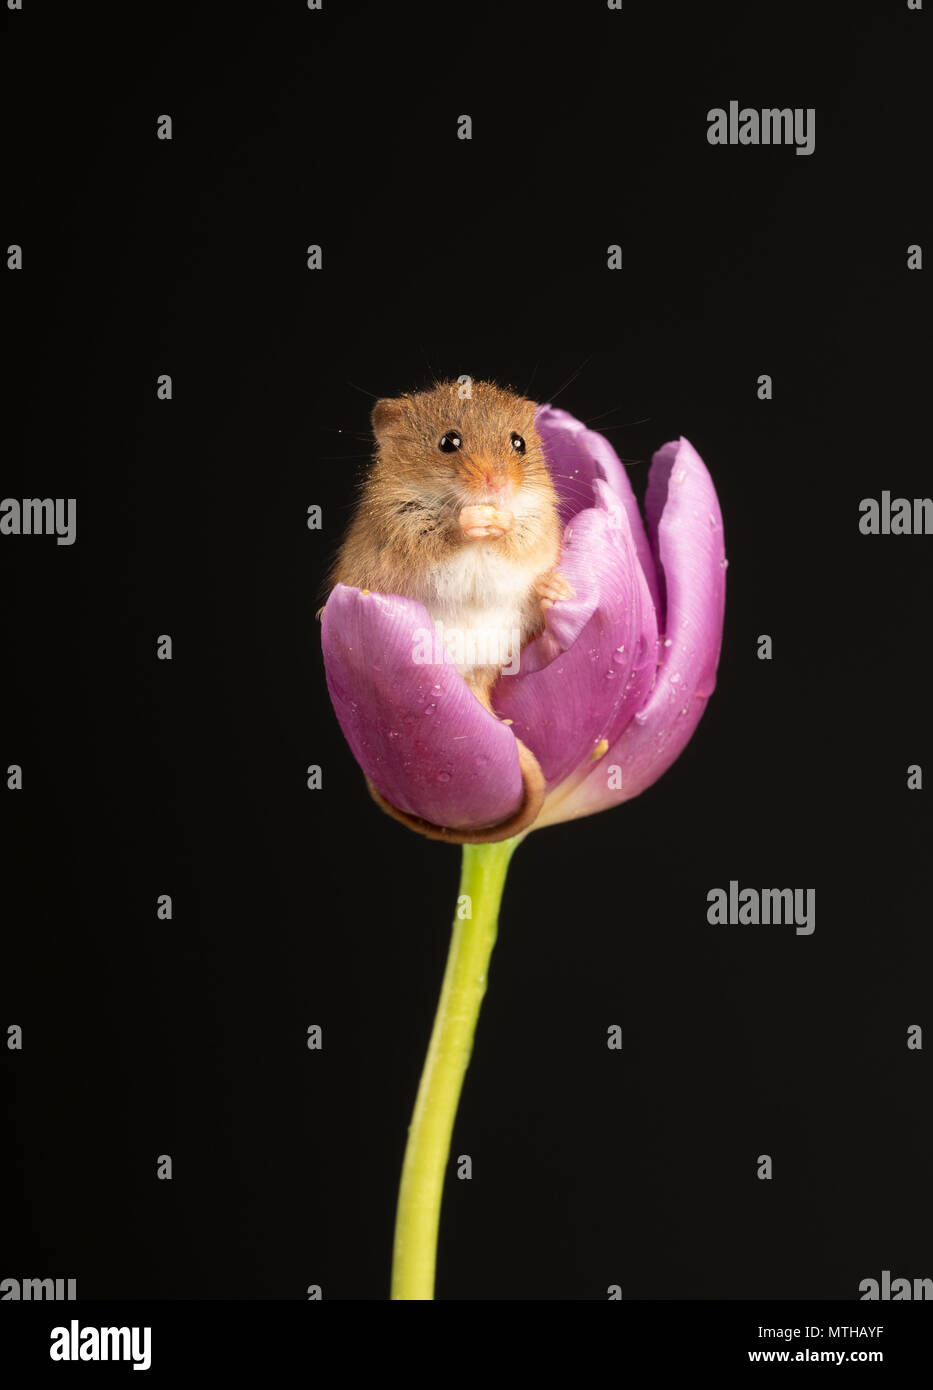 Harvest mouse sitting in a purple tulip in a studio setting Stock Photo